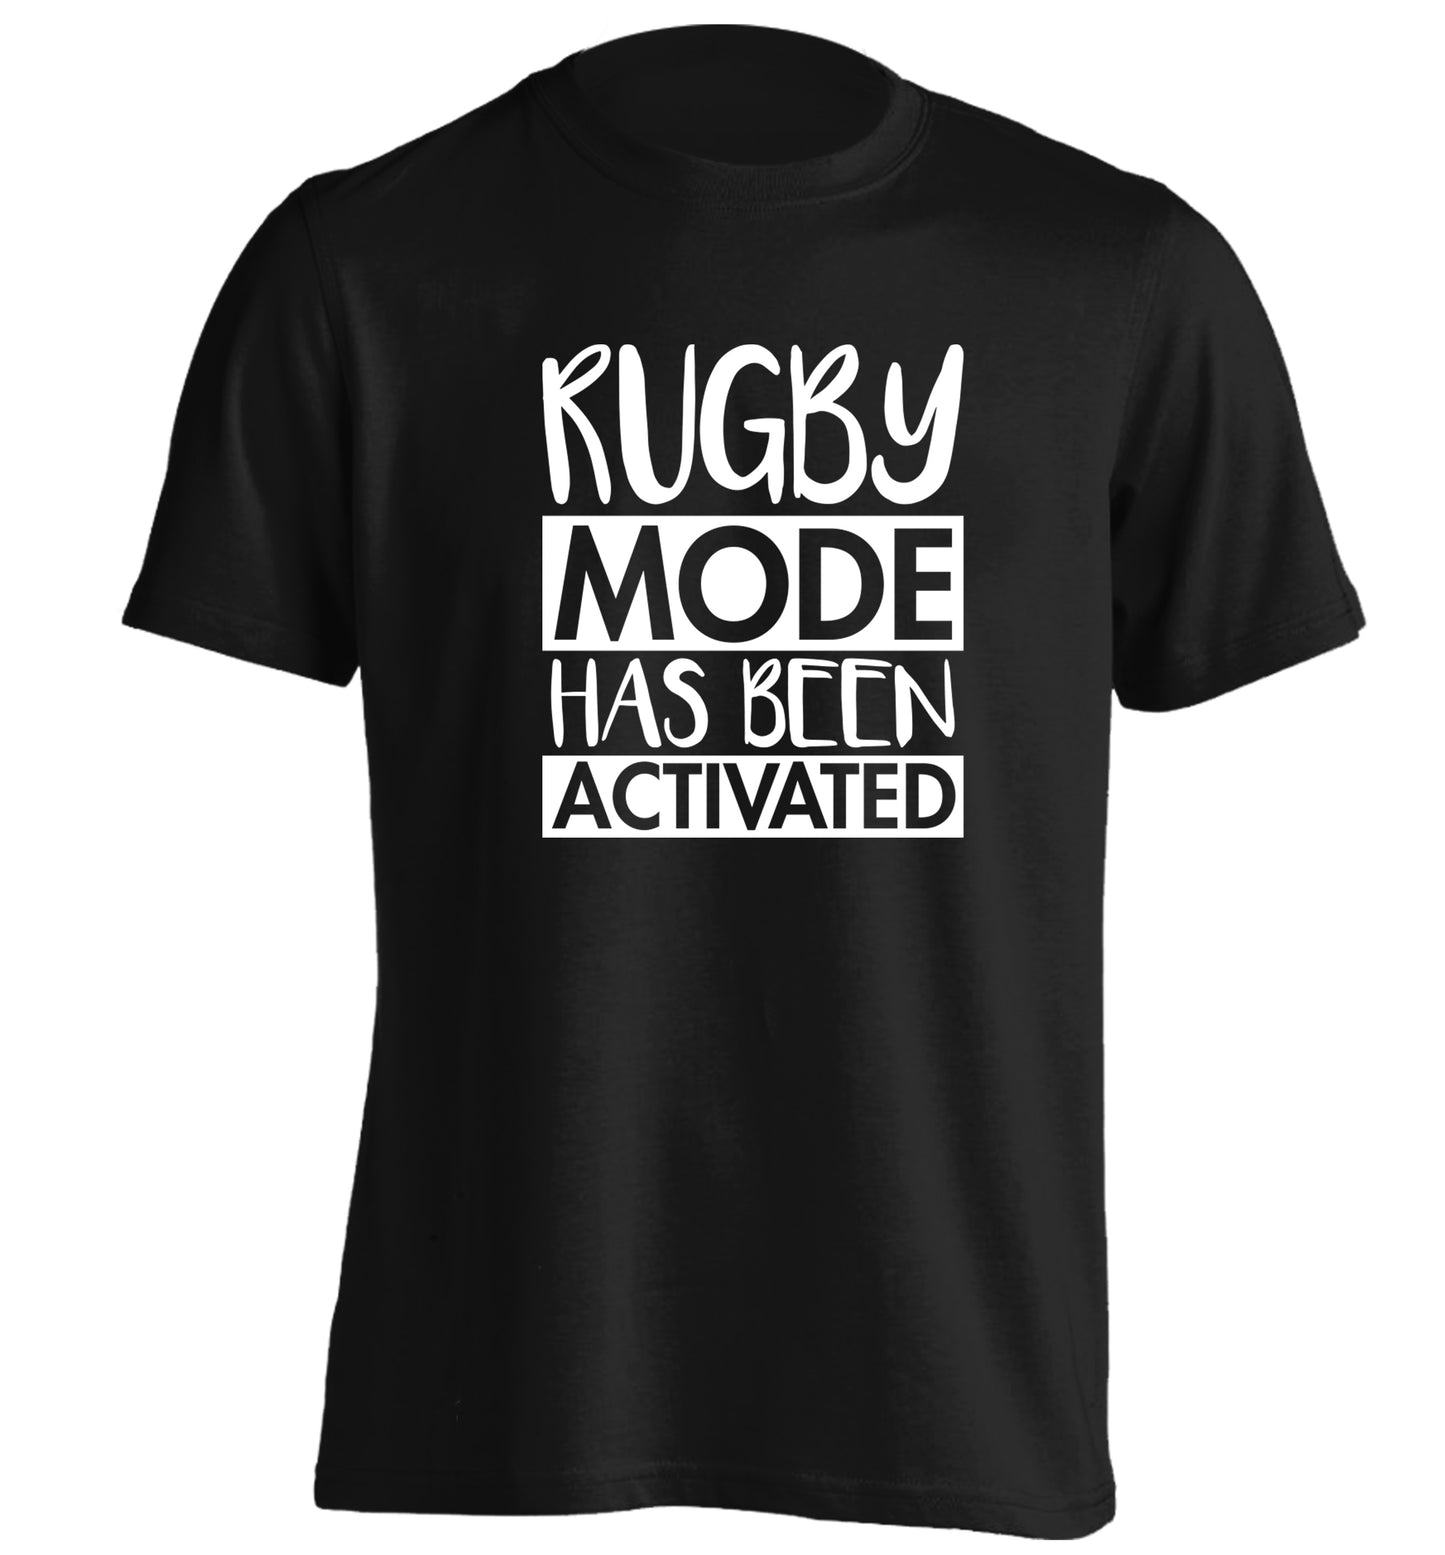 Rugby mode activated adults unisex black Tshirt 2XL